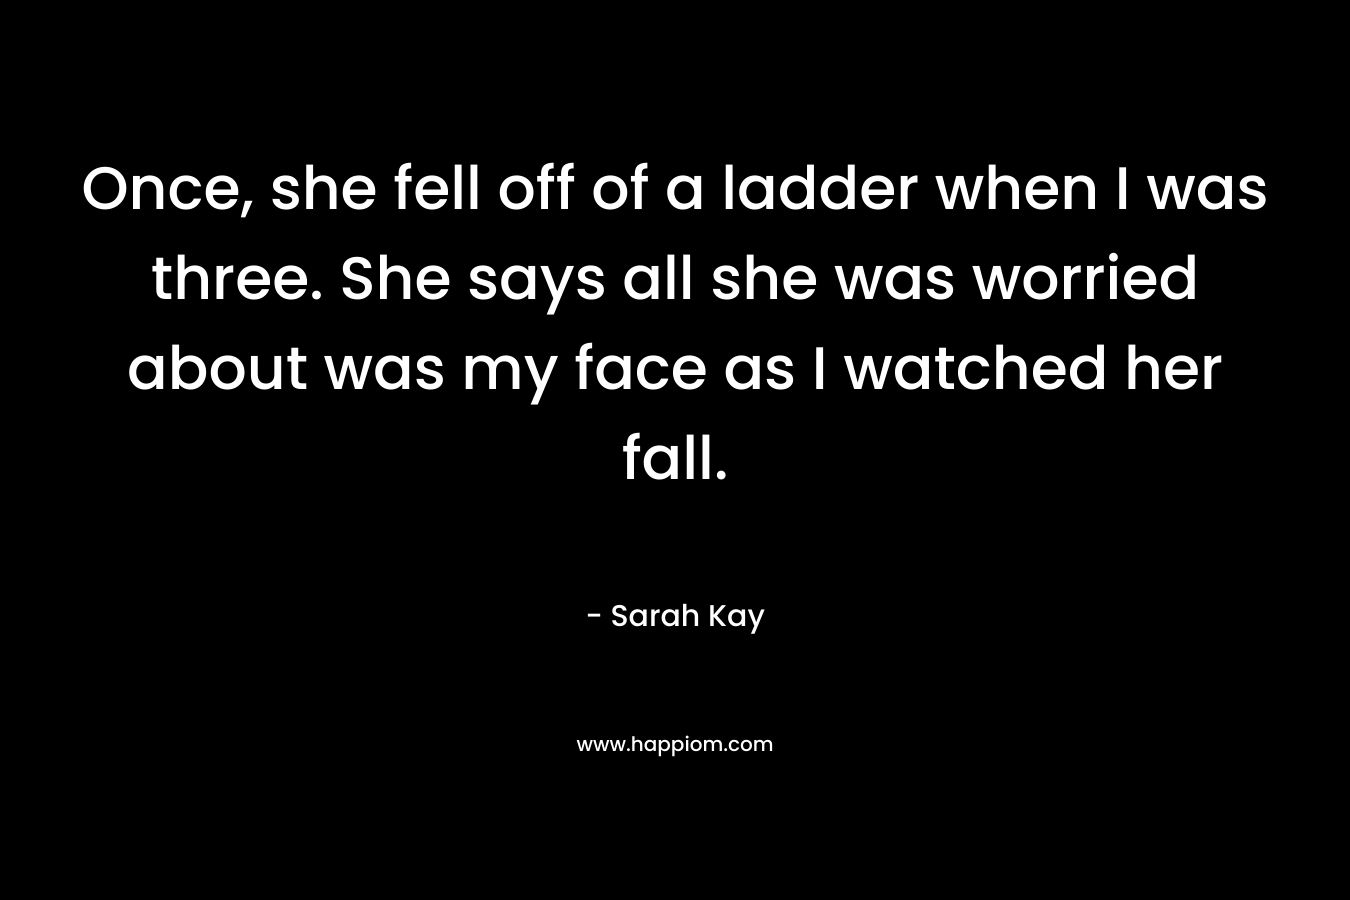 Once, she fell off of a ladder when I was three. She says all she was worried about was my face as I watched her fall. – Sarah Kay